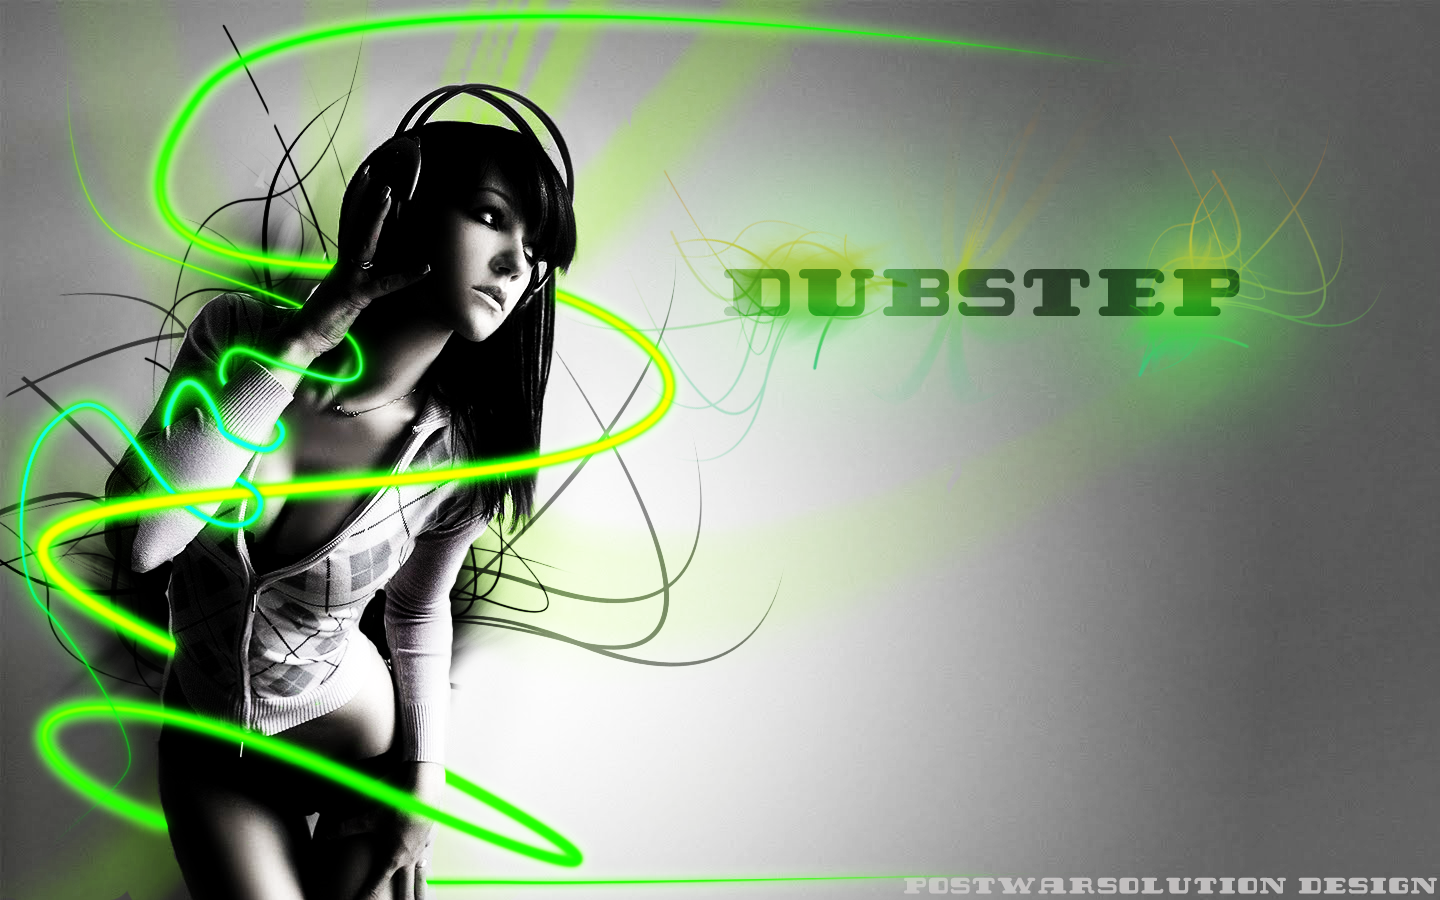 Best Of Bassmusic Megamixes And Dubstep Drops Top Filthy